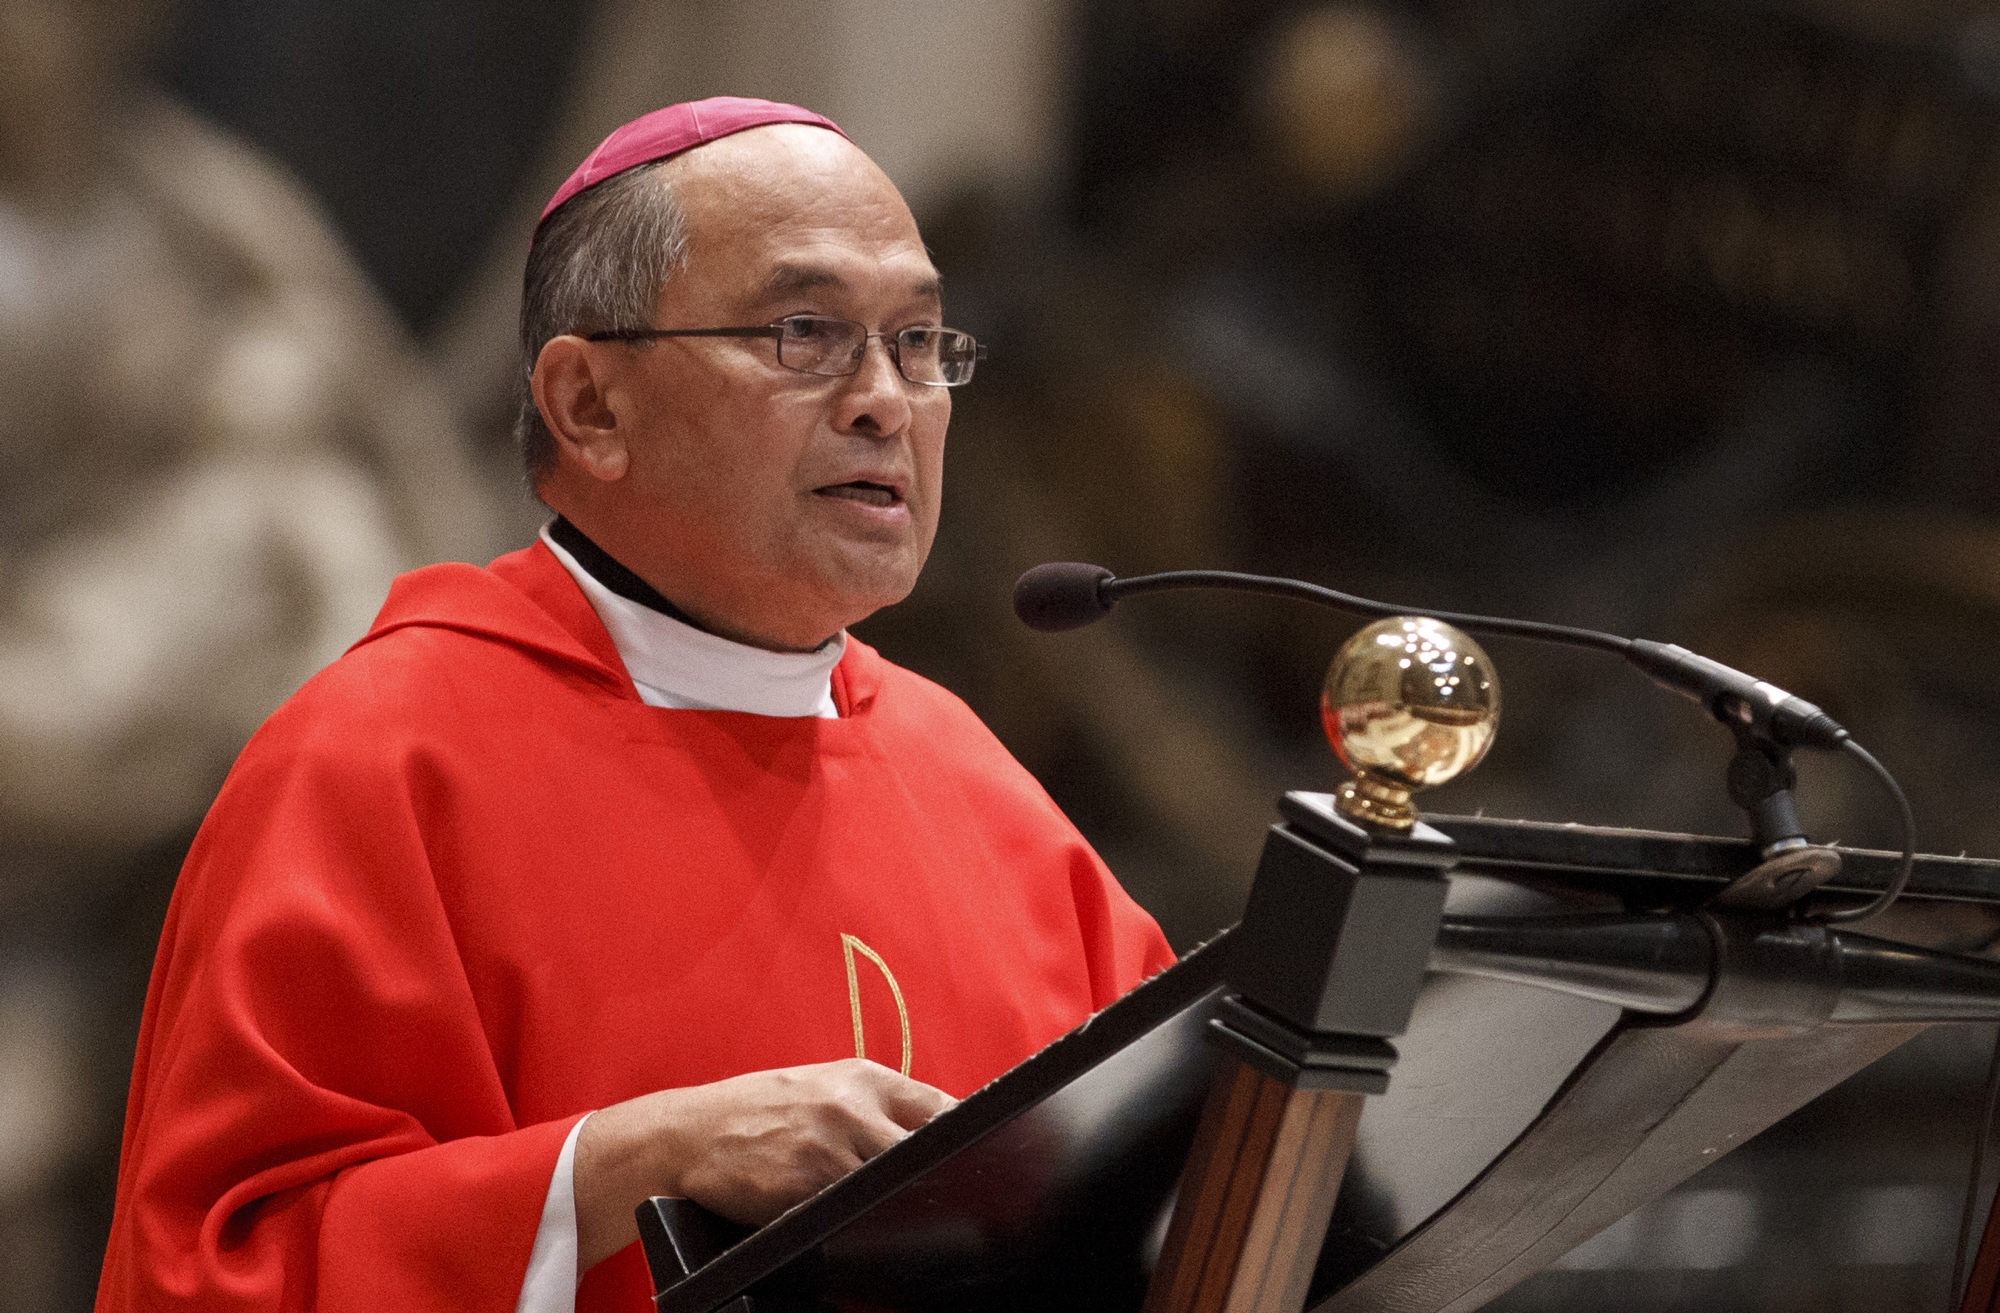 Guam archbishop to be removed from office